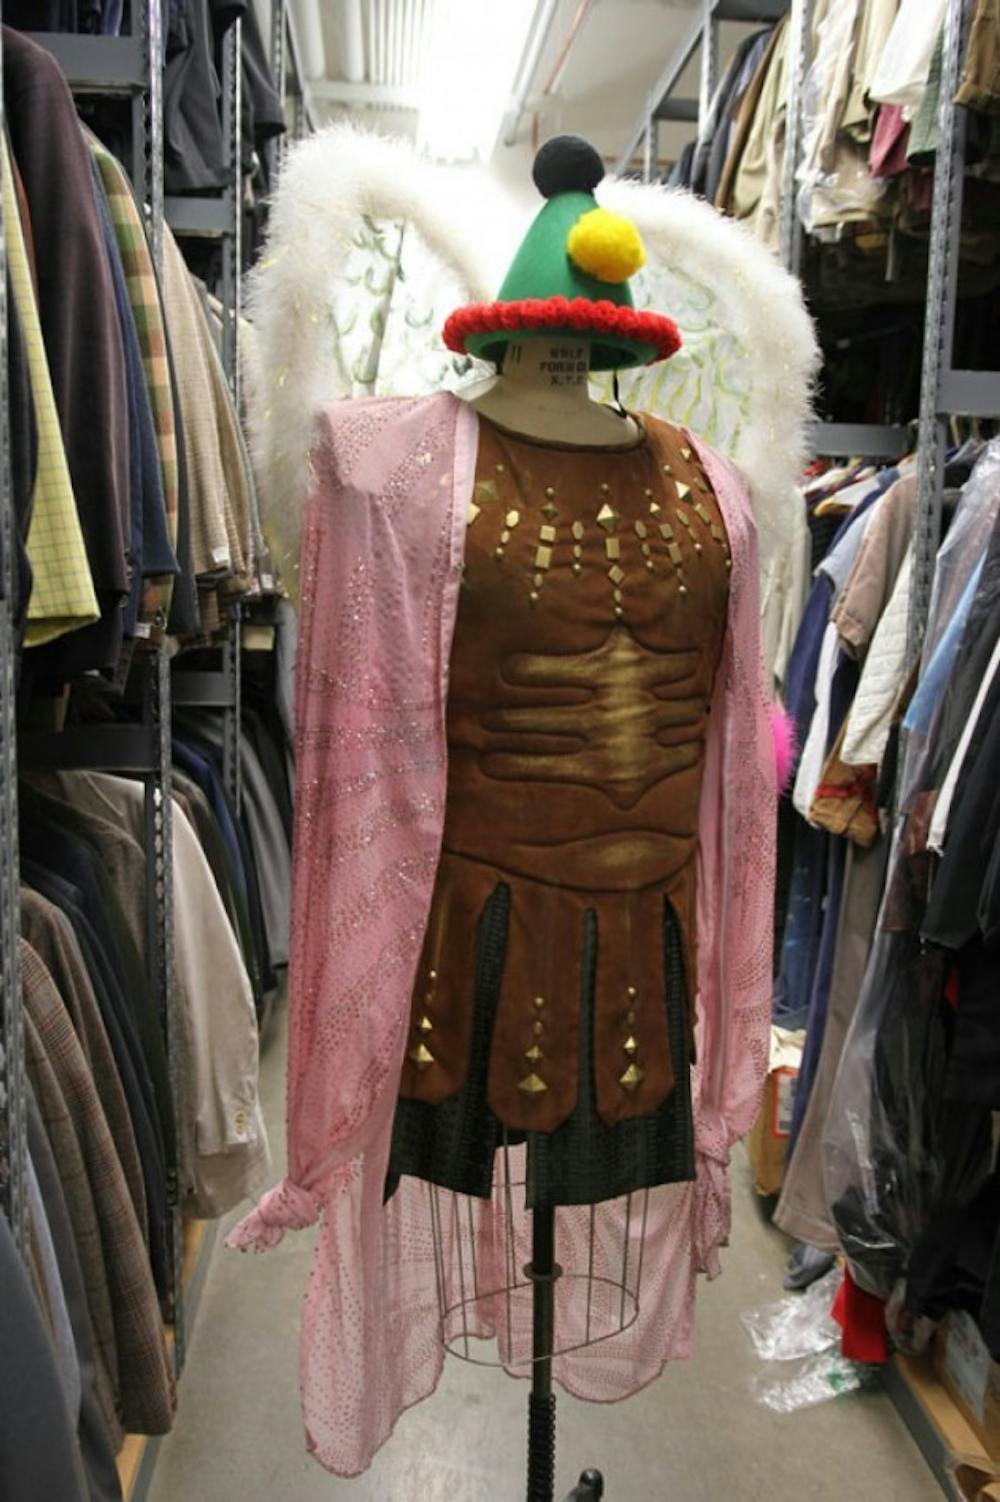 Hundreds of costumes are stowed away in the Theatre
Department&rsquo;s costume shop, a wardrobe filled with clothing from
the shows performed at UB. Chad Cooper, The Spectrum&nbsp;